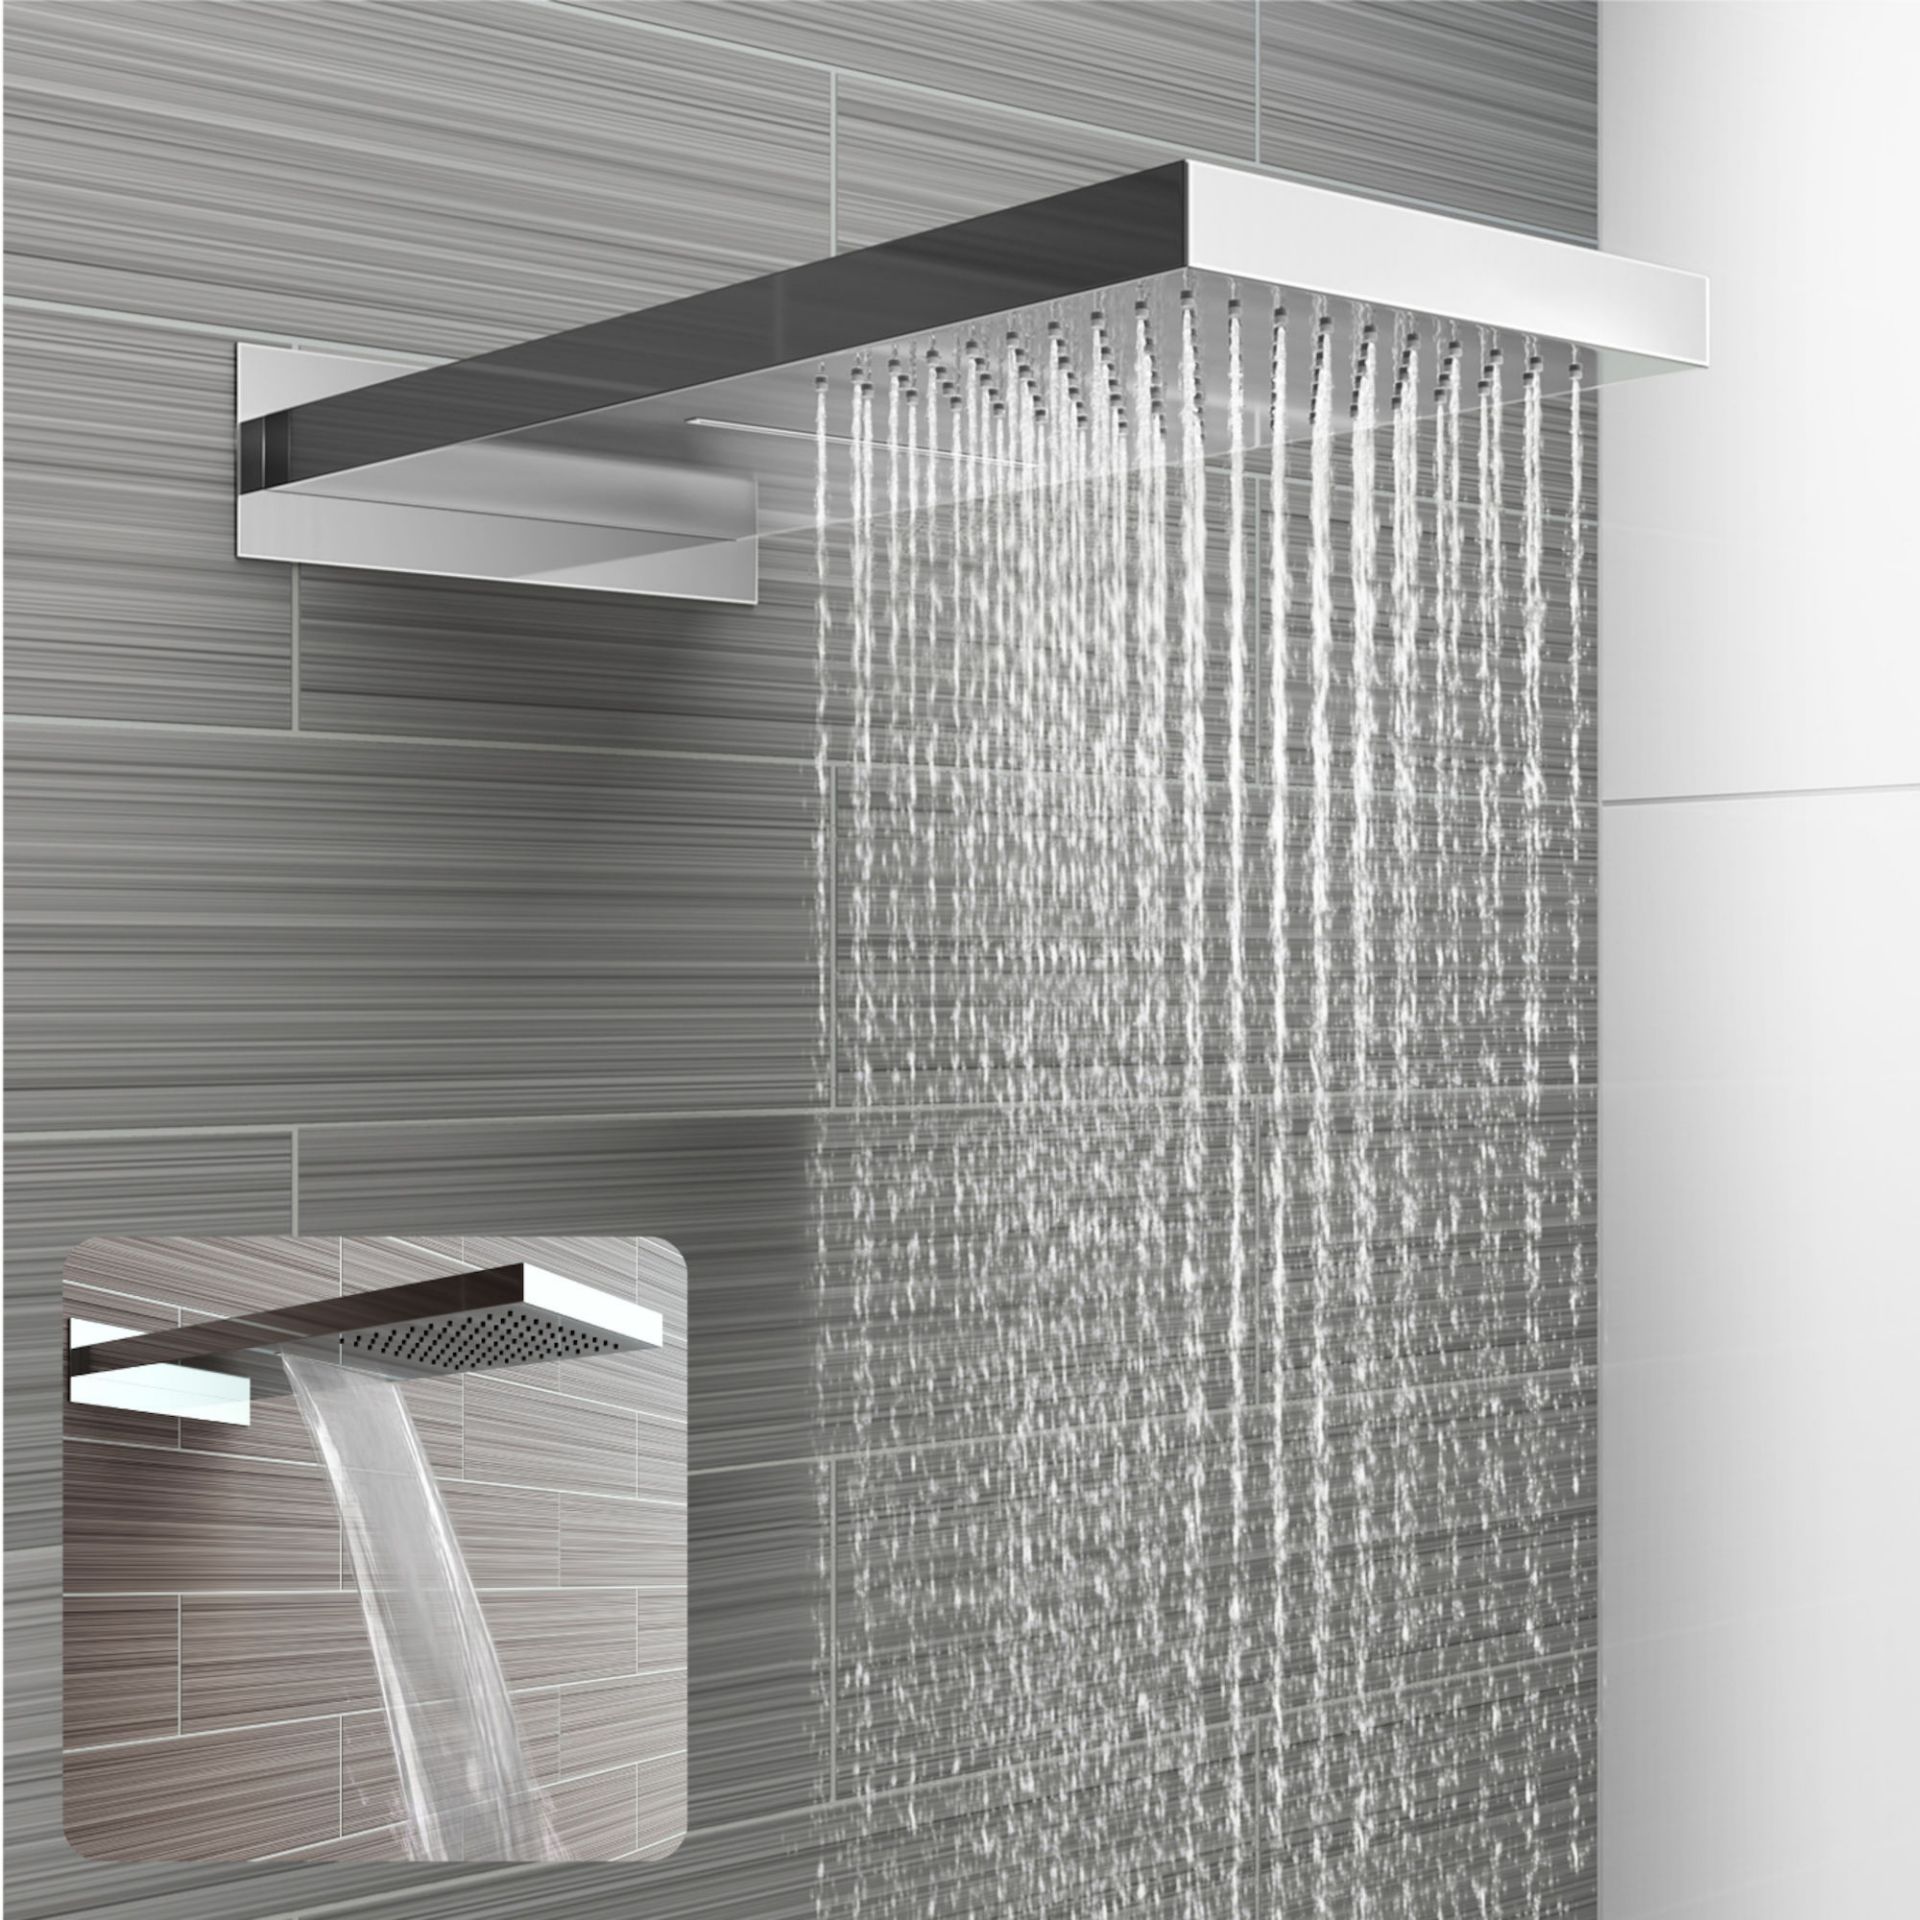 (PM41) Stainless Steel 230x500mm Waterfall Shower Head. RRP £374.99. Dual function waterfall a...